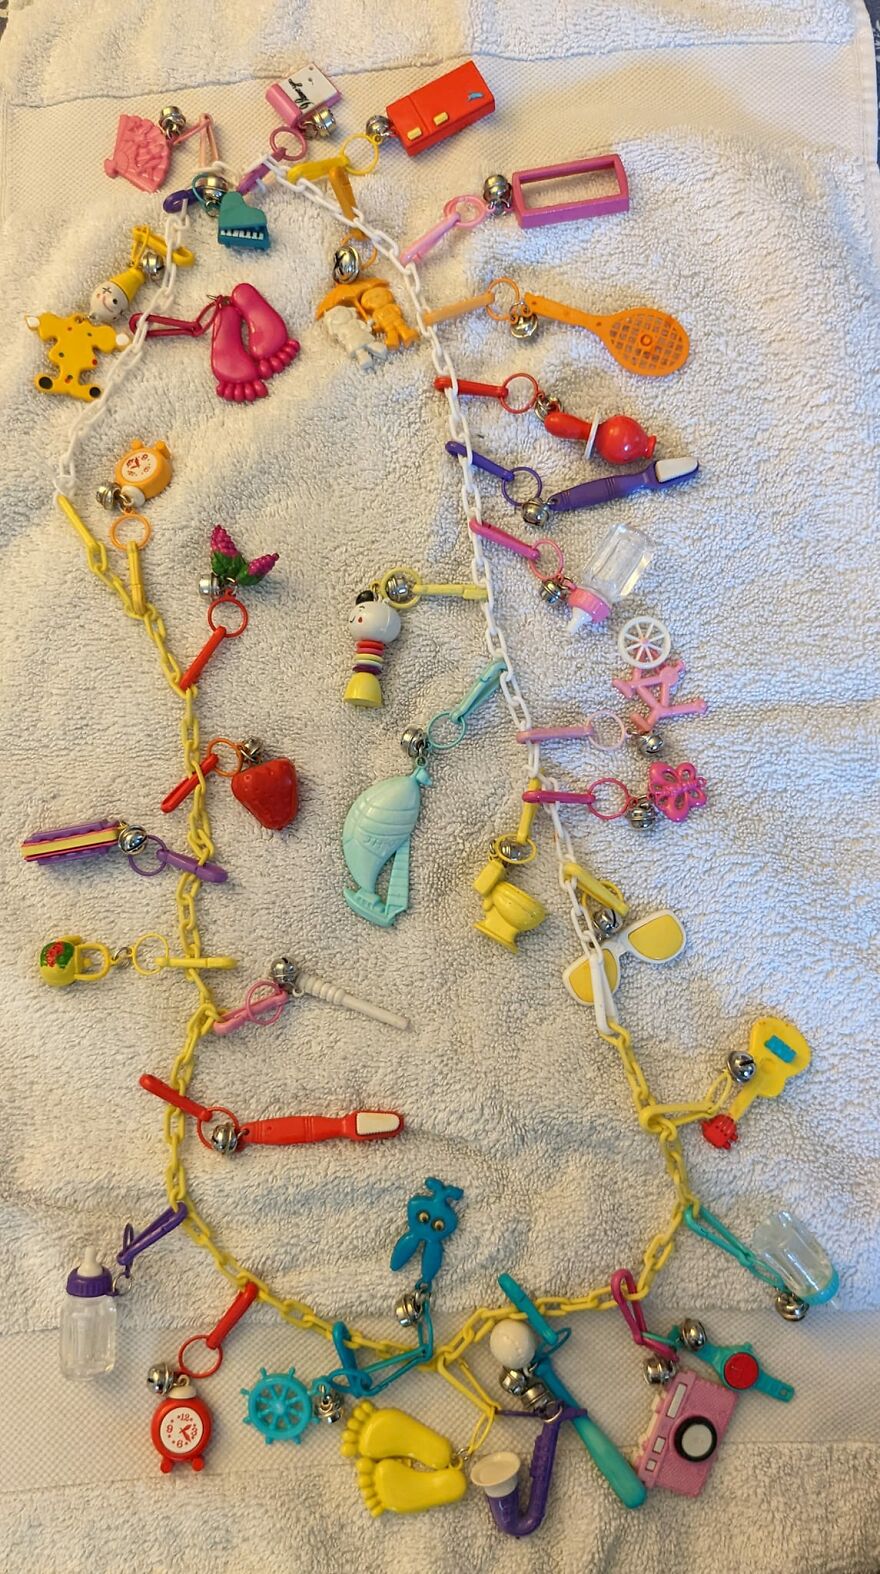 A Recent Purchase From Goodwill. I Am An 80s Kid And I Have A Charm Necklace Like This Packed Away From My Childhood Somewhere....not As Many Charms Like This One Has. I Love This One!